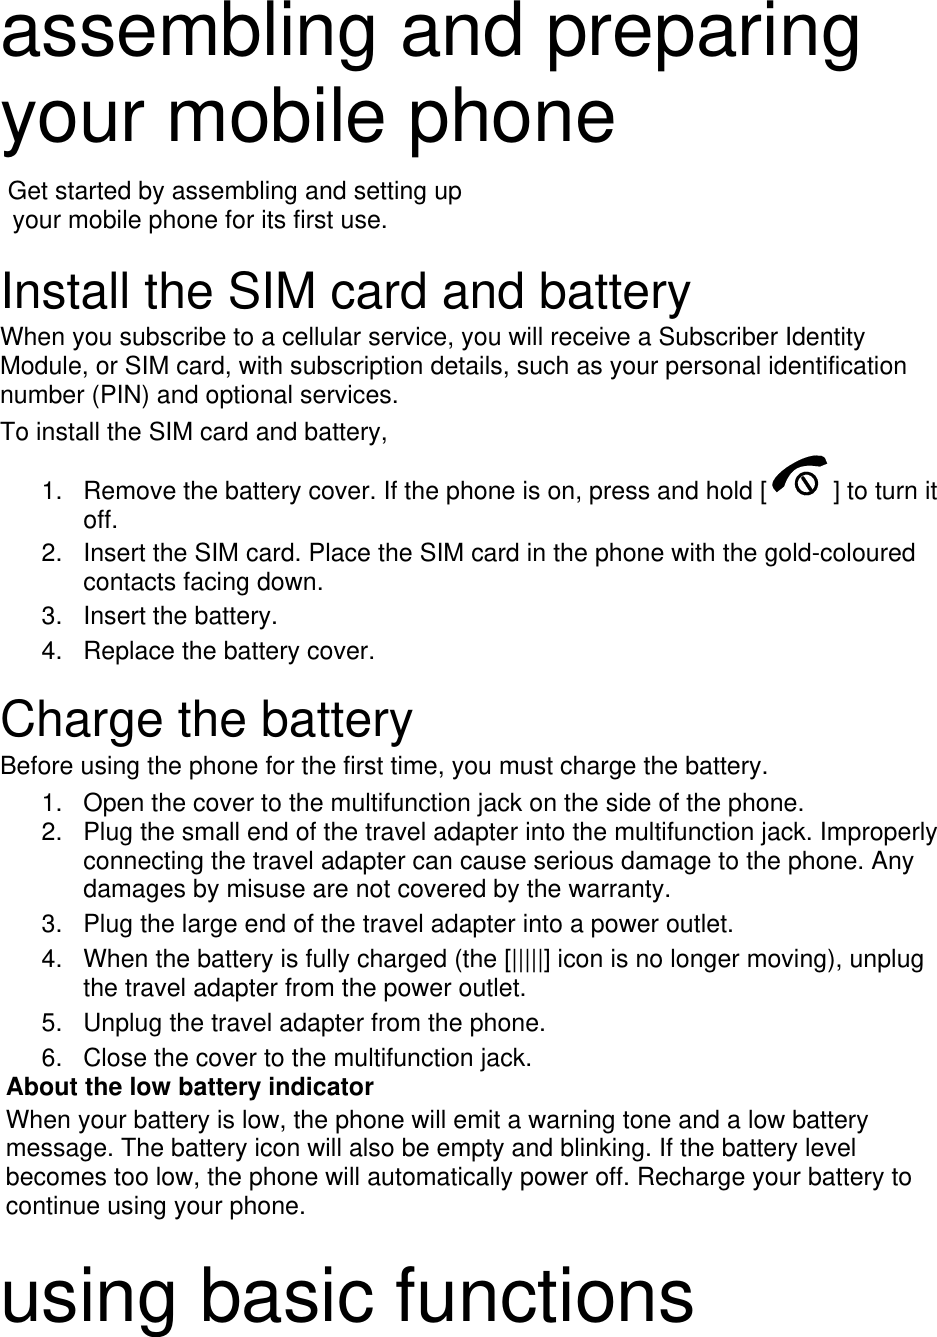  assembling and preparing your mobile phone    Get started by assembling and setting up     your mobile phone for its first use.  Install the SIM card and battery When you subscribe to a cellular service, you will receive a Subscriber Identity Module, or SIM card, with subscription details, such as your personal identification number (PIN) and optional services. To install the SIM card and battery, 1.  Remove the battery cover. If the phone is on, press and hold [ ] to turn it off. 2.  Insert the SIM card. Place the SIM card in the phone with the gold-coloured contacts facing down. 3. Insert the battery. 4.  Replace the battery cover.  Charge the battery Before using the phone for the first time, you must charge the battery. 1.  Open the cover to the multifunction jack on the side of the phone. 2.  Plug the small end of the travel adapter into the multifunction jack. Improperly connecting the travel adapter can cause serious damage to the phone. Any damages by misuse are not covered by the warranty. 3.  Plug the large end of the travel adapter into a power outlet. 4.  When the battery is fully charged (the [|||||] icon is no longer moving), unplug the travel adapter from the power outlet. 5.  Unplug the travel adapter from the phone. 6.  Close the cover to the multifunction jack. About the low battery indicator When your battery is low, the phone will emit a warning tone and a low battery message. The battery icon will also be empty and blinking. If the battery level becomes too low, the phone will automatically power off. Recharge your battery to continue using your phone.  using basic functions 